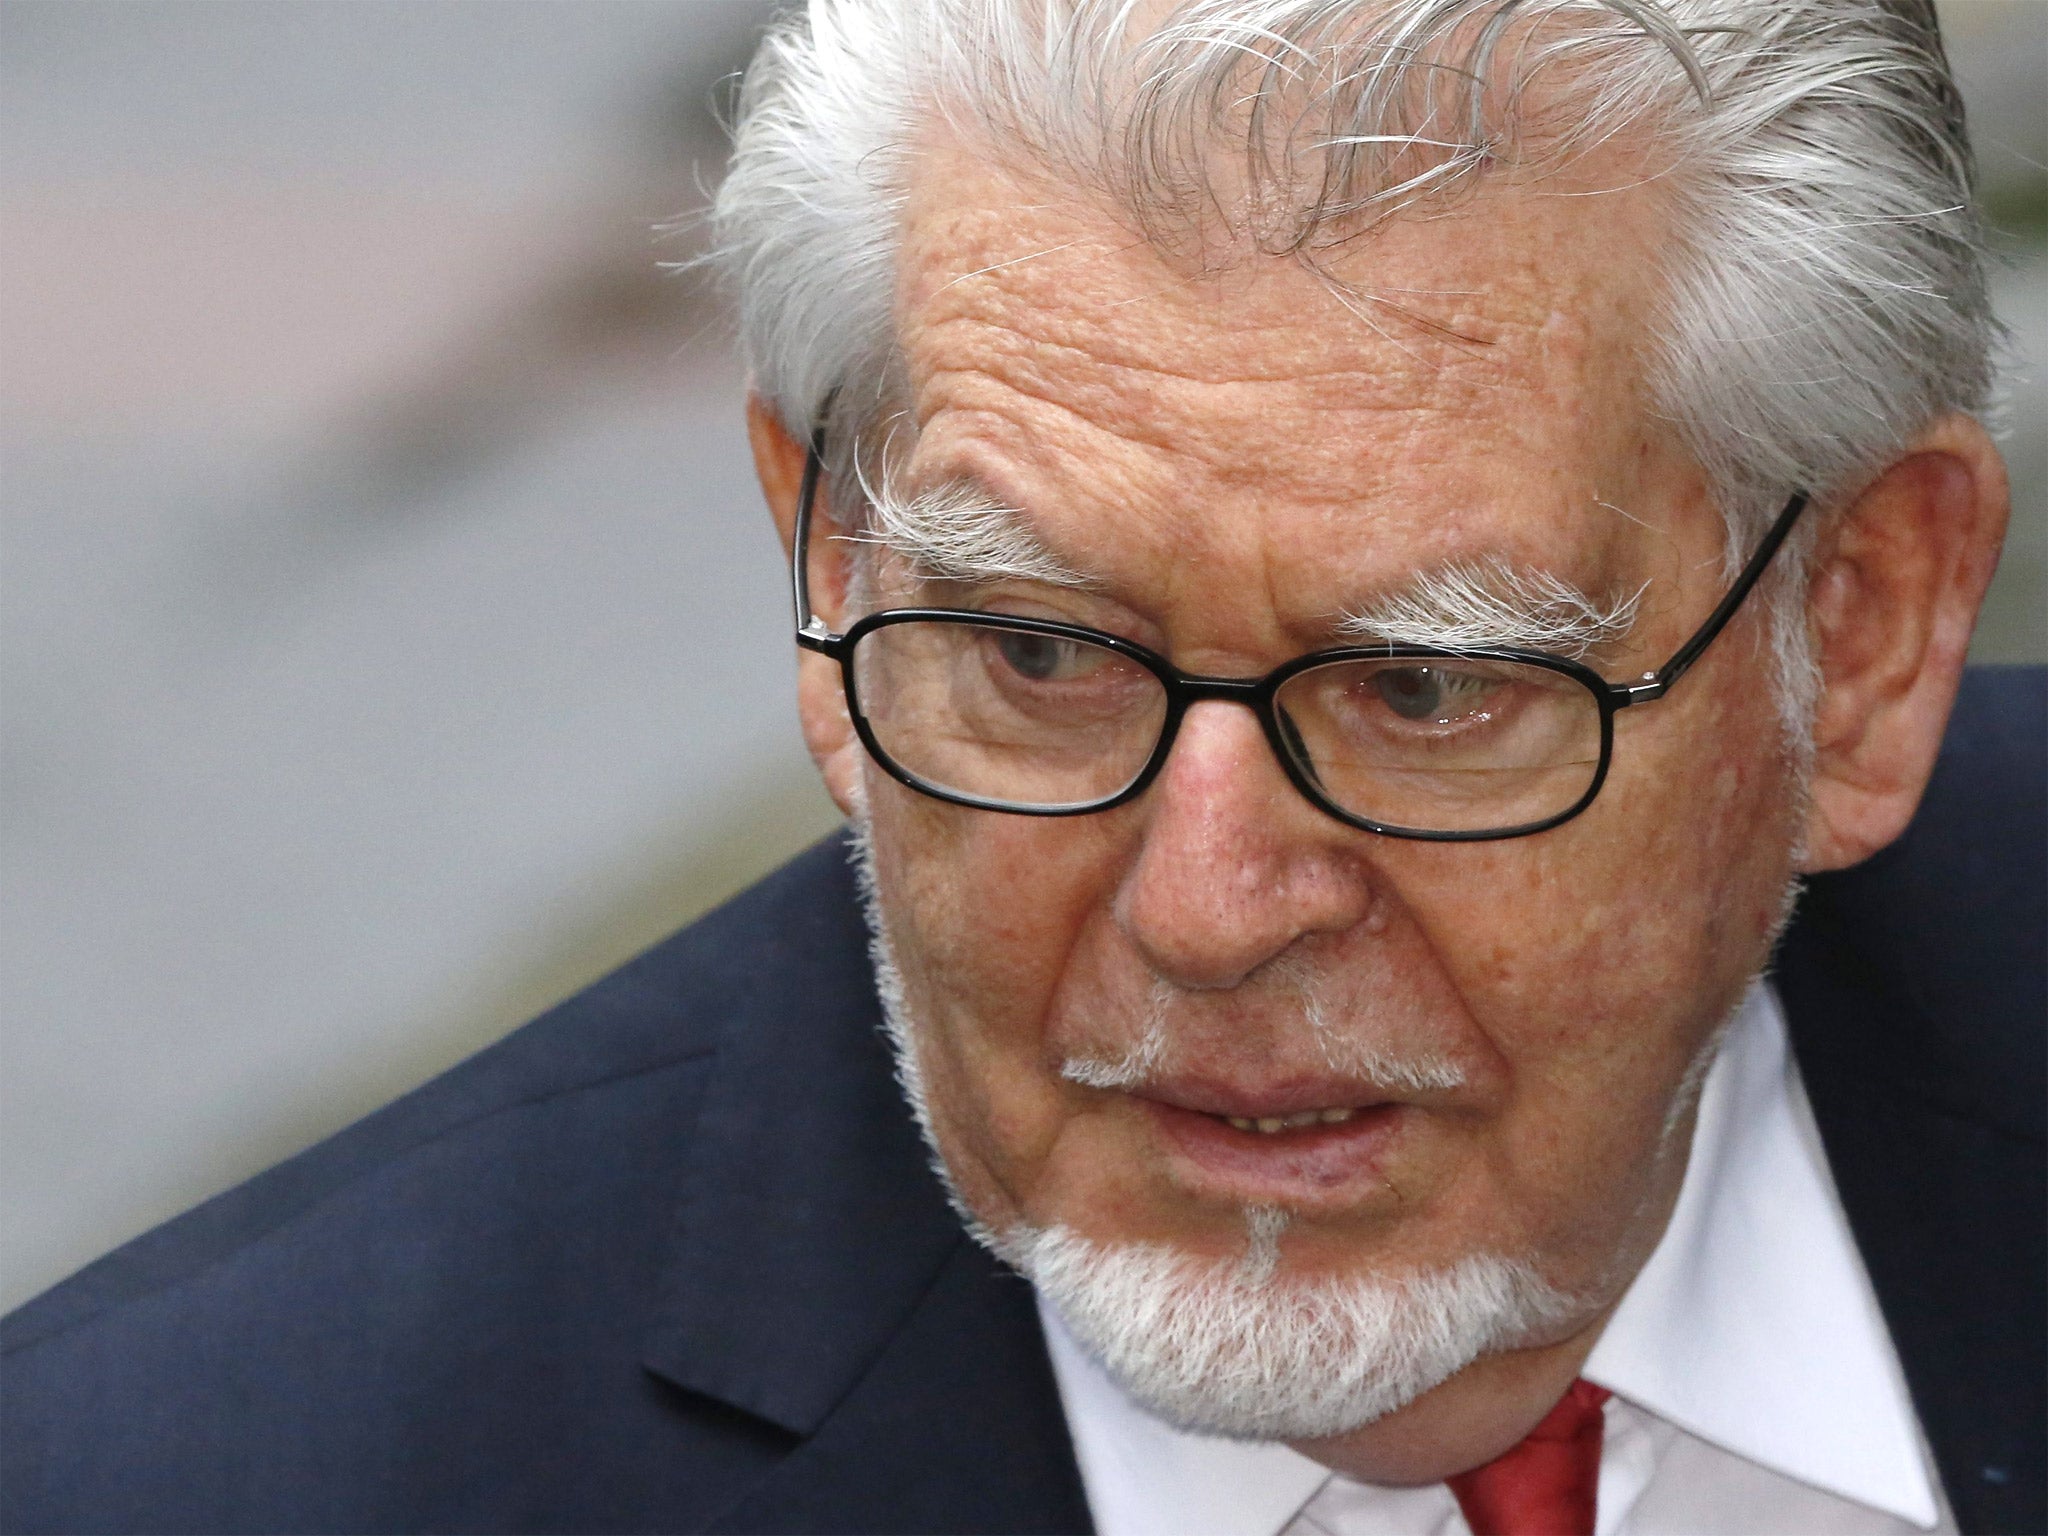 Rolf Harris is accused of 12 counts of indecent assault on four women between 1968 and 1986, all of which he denies